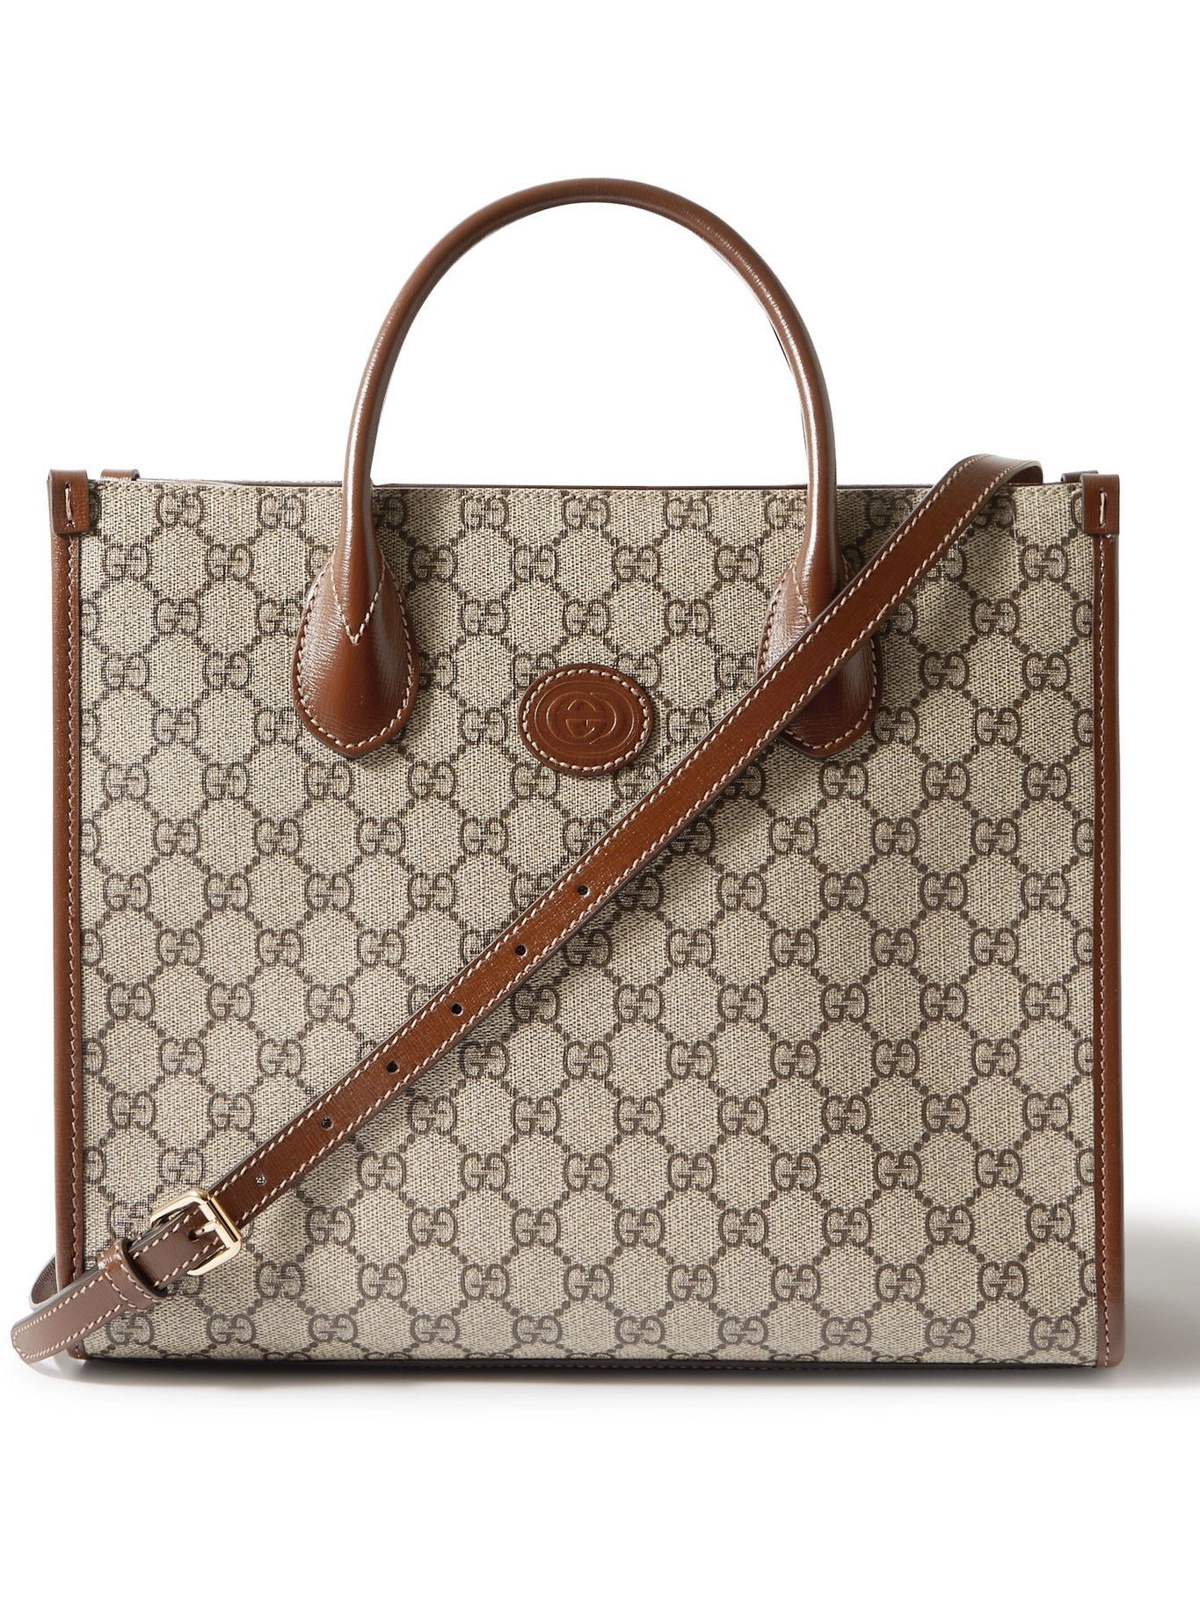 GUCCI Ophidia Leather-Trimmed Monogrammed Coated-Canvas Duffle Bag